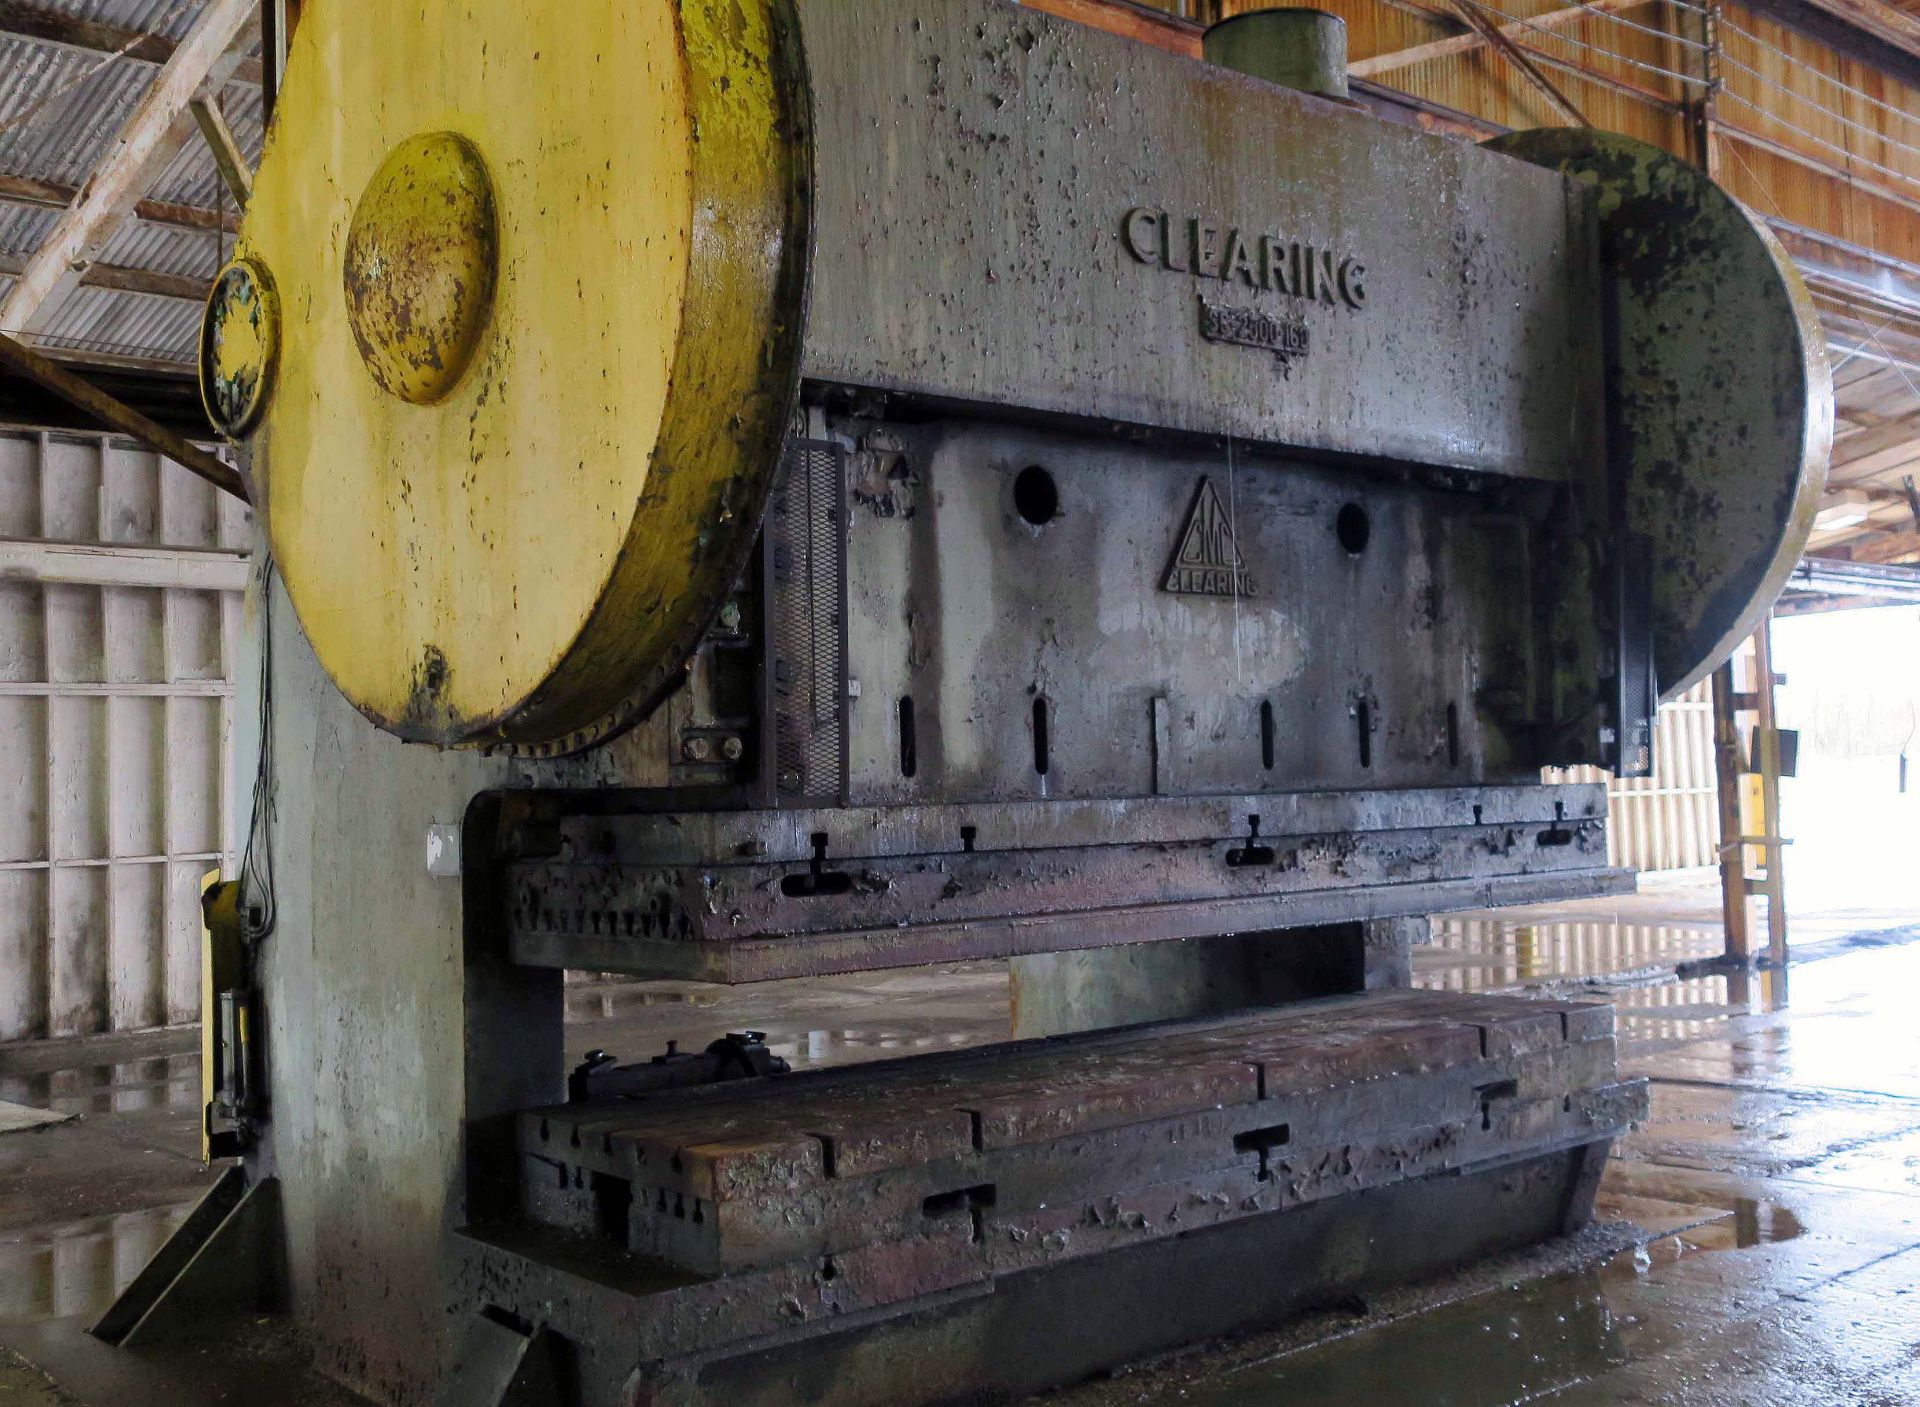 DOUBLE CRANK GAP PRESS, CLEARING 500 T. CAP. MDL. SG-2500-160, 42" x 160" bed size, assorted bed &